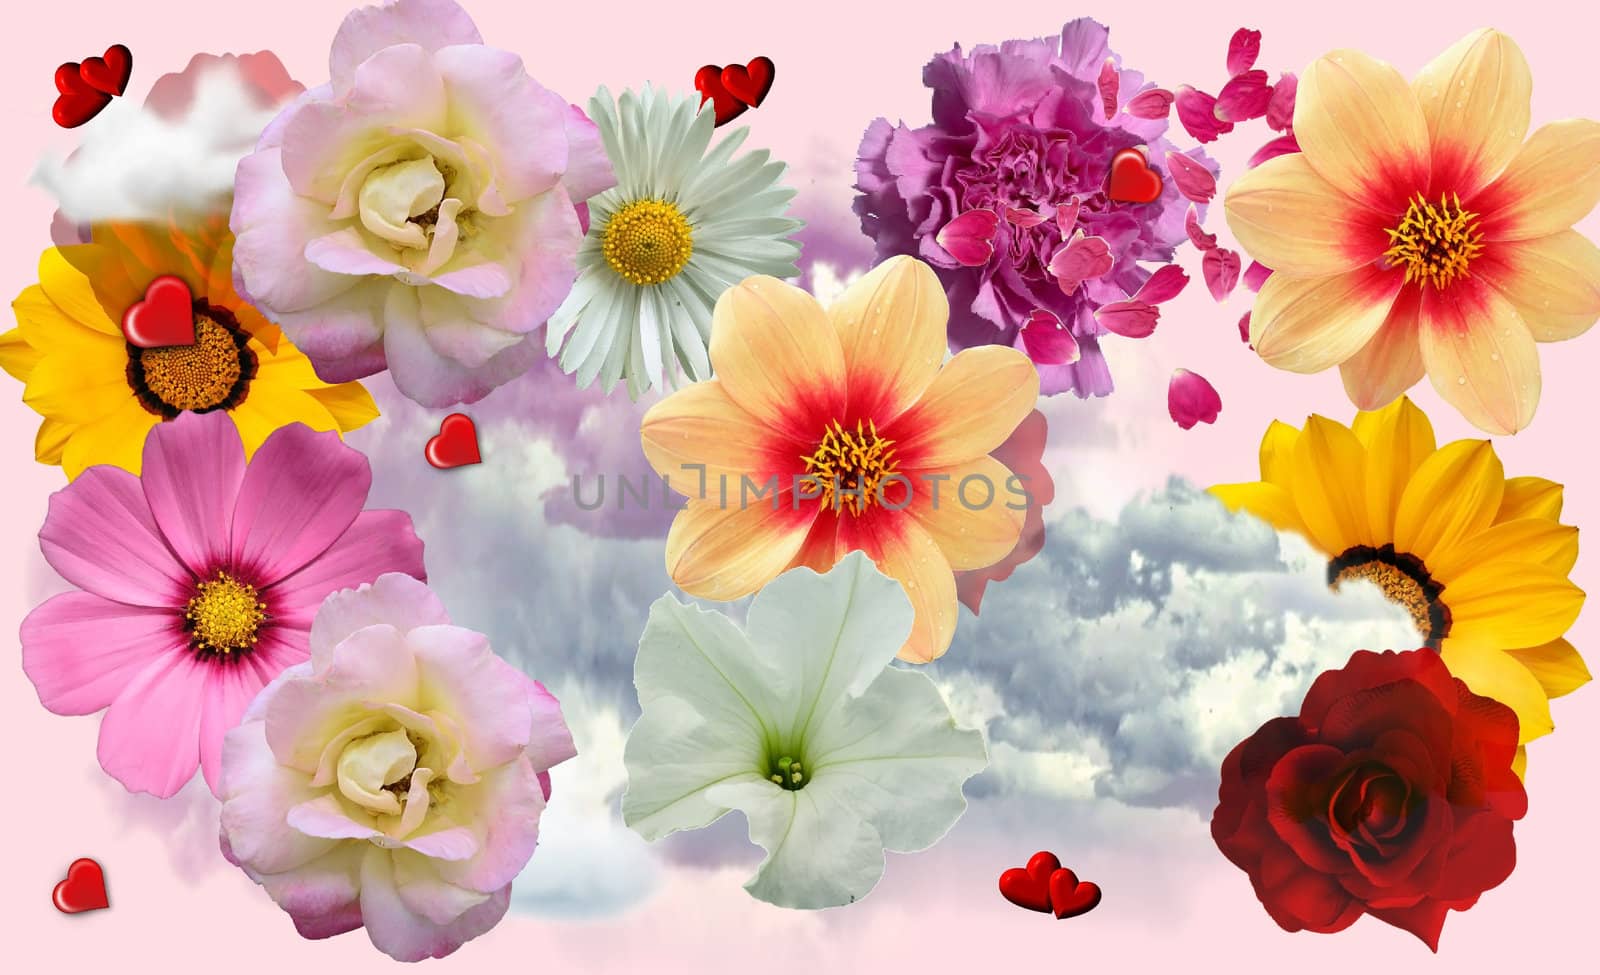 flower collage by toady8